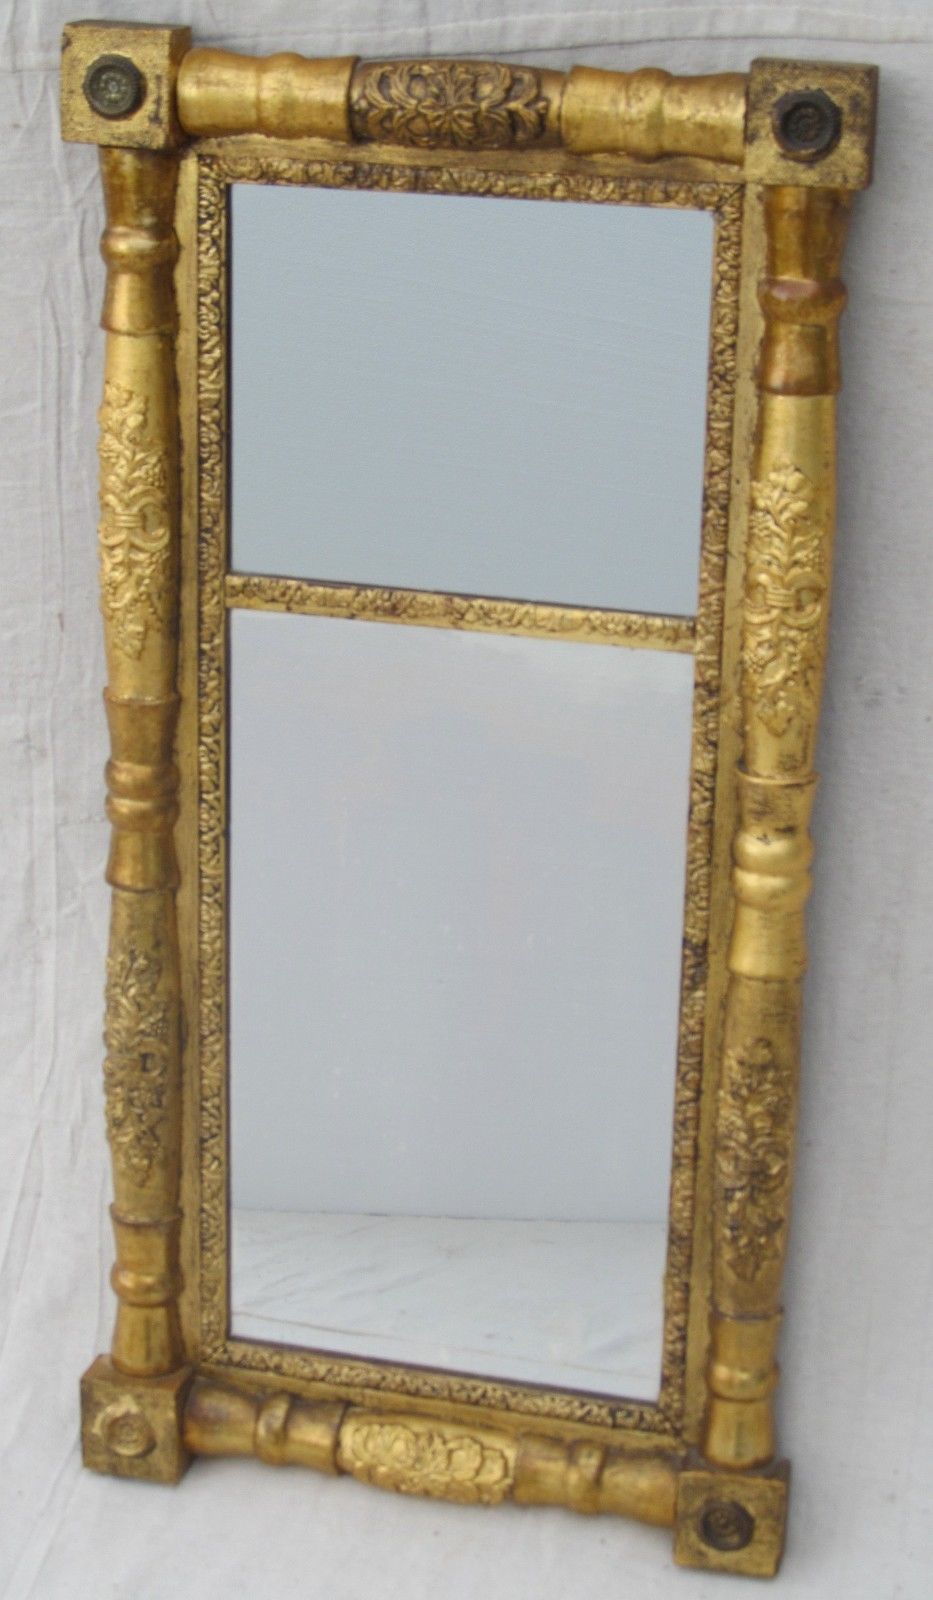 EARLY 19TH CENTURY FINE GOLD GILDED SHERATON MIRROR WITH BRASS ROSETTES